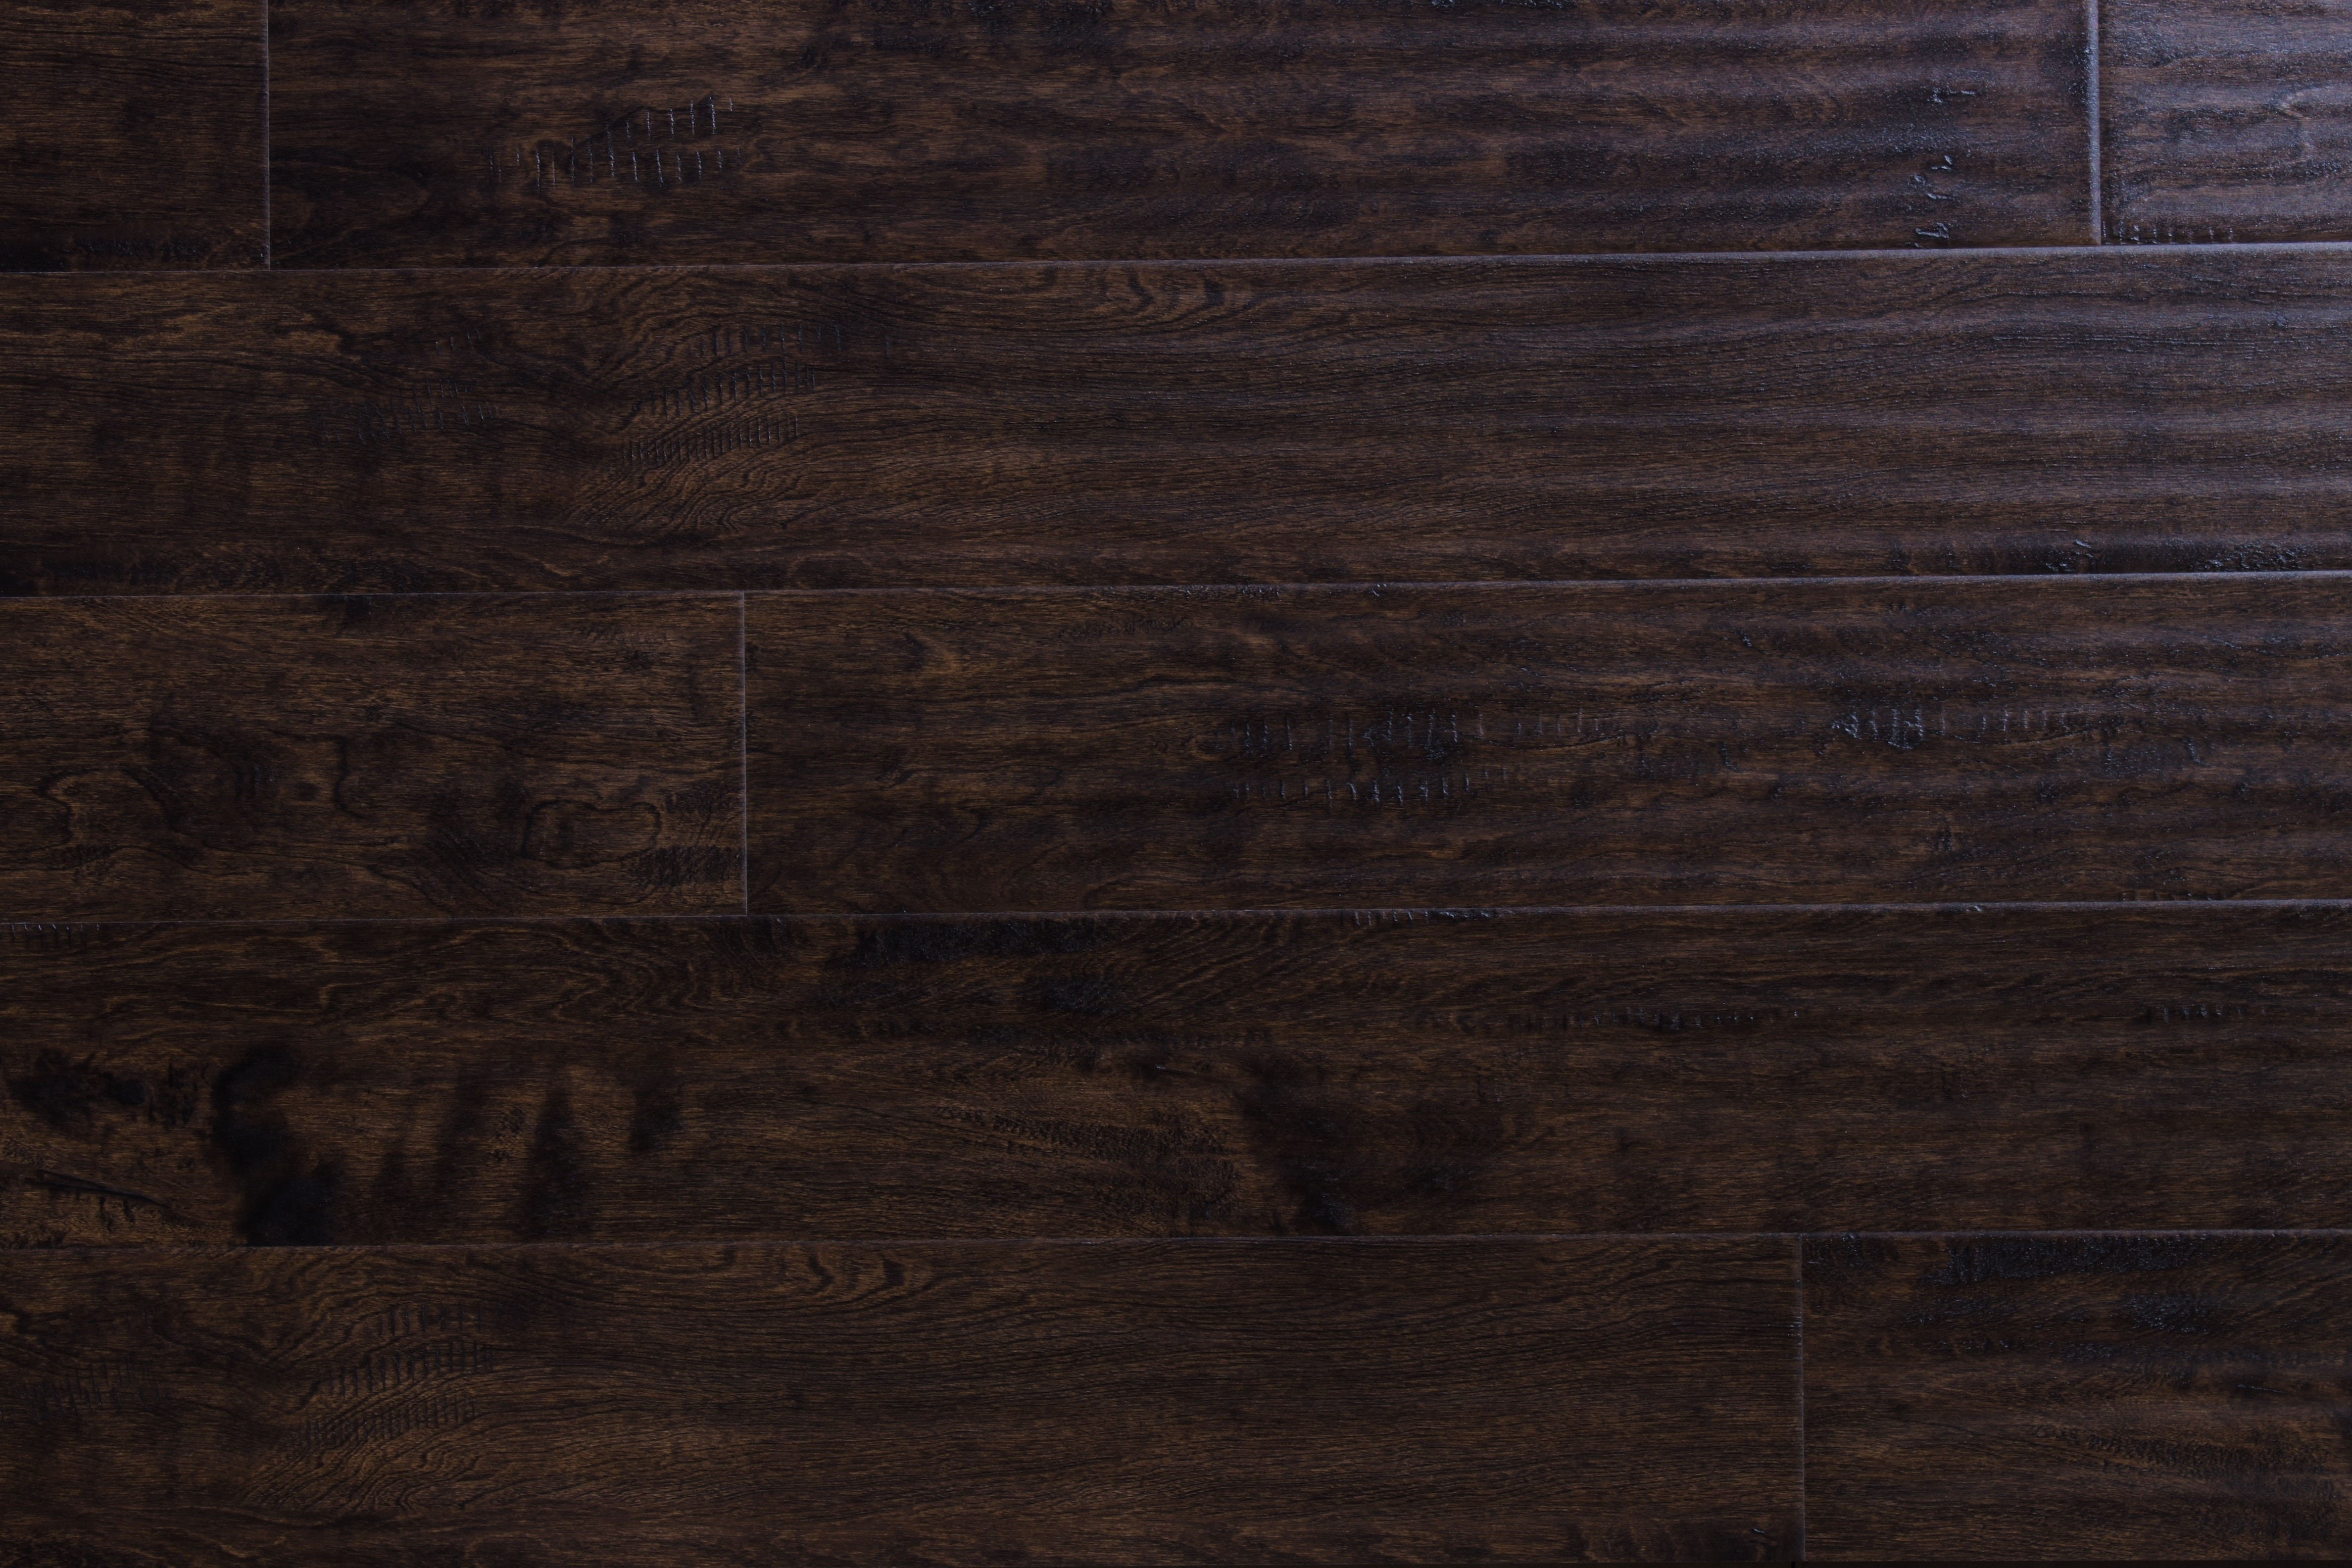 19 Lovely Bruce Hardwood Flooring atlanta 2024 free download bruce hardwood flooring atlanta of wood flooring free samples available at builddirecta with tailor multi gb 5874277bb8d3c